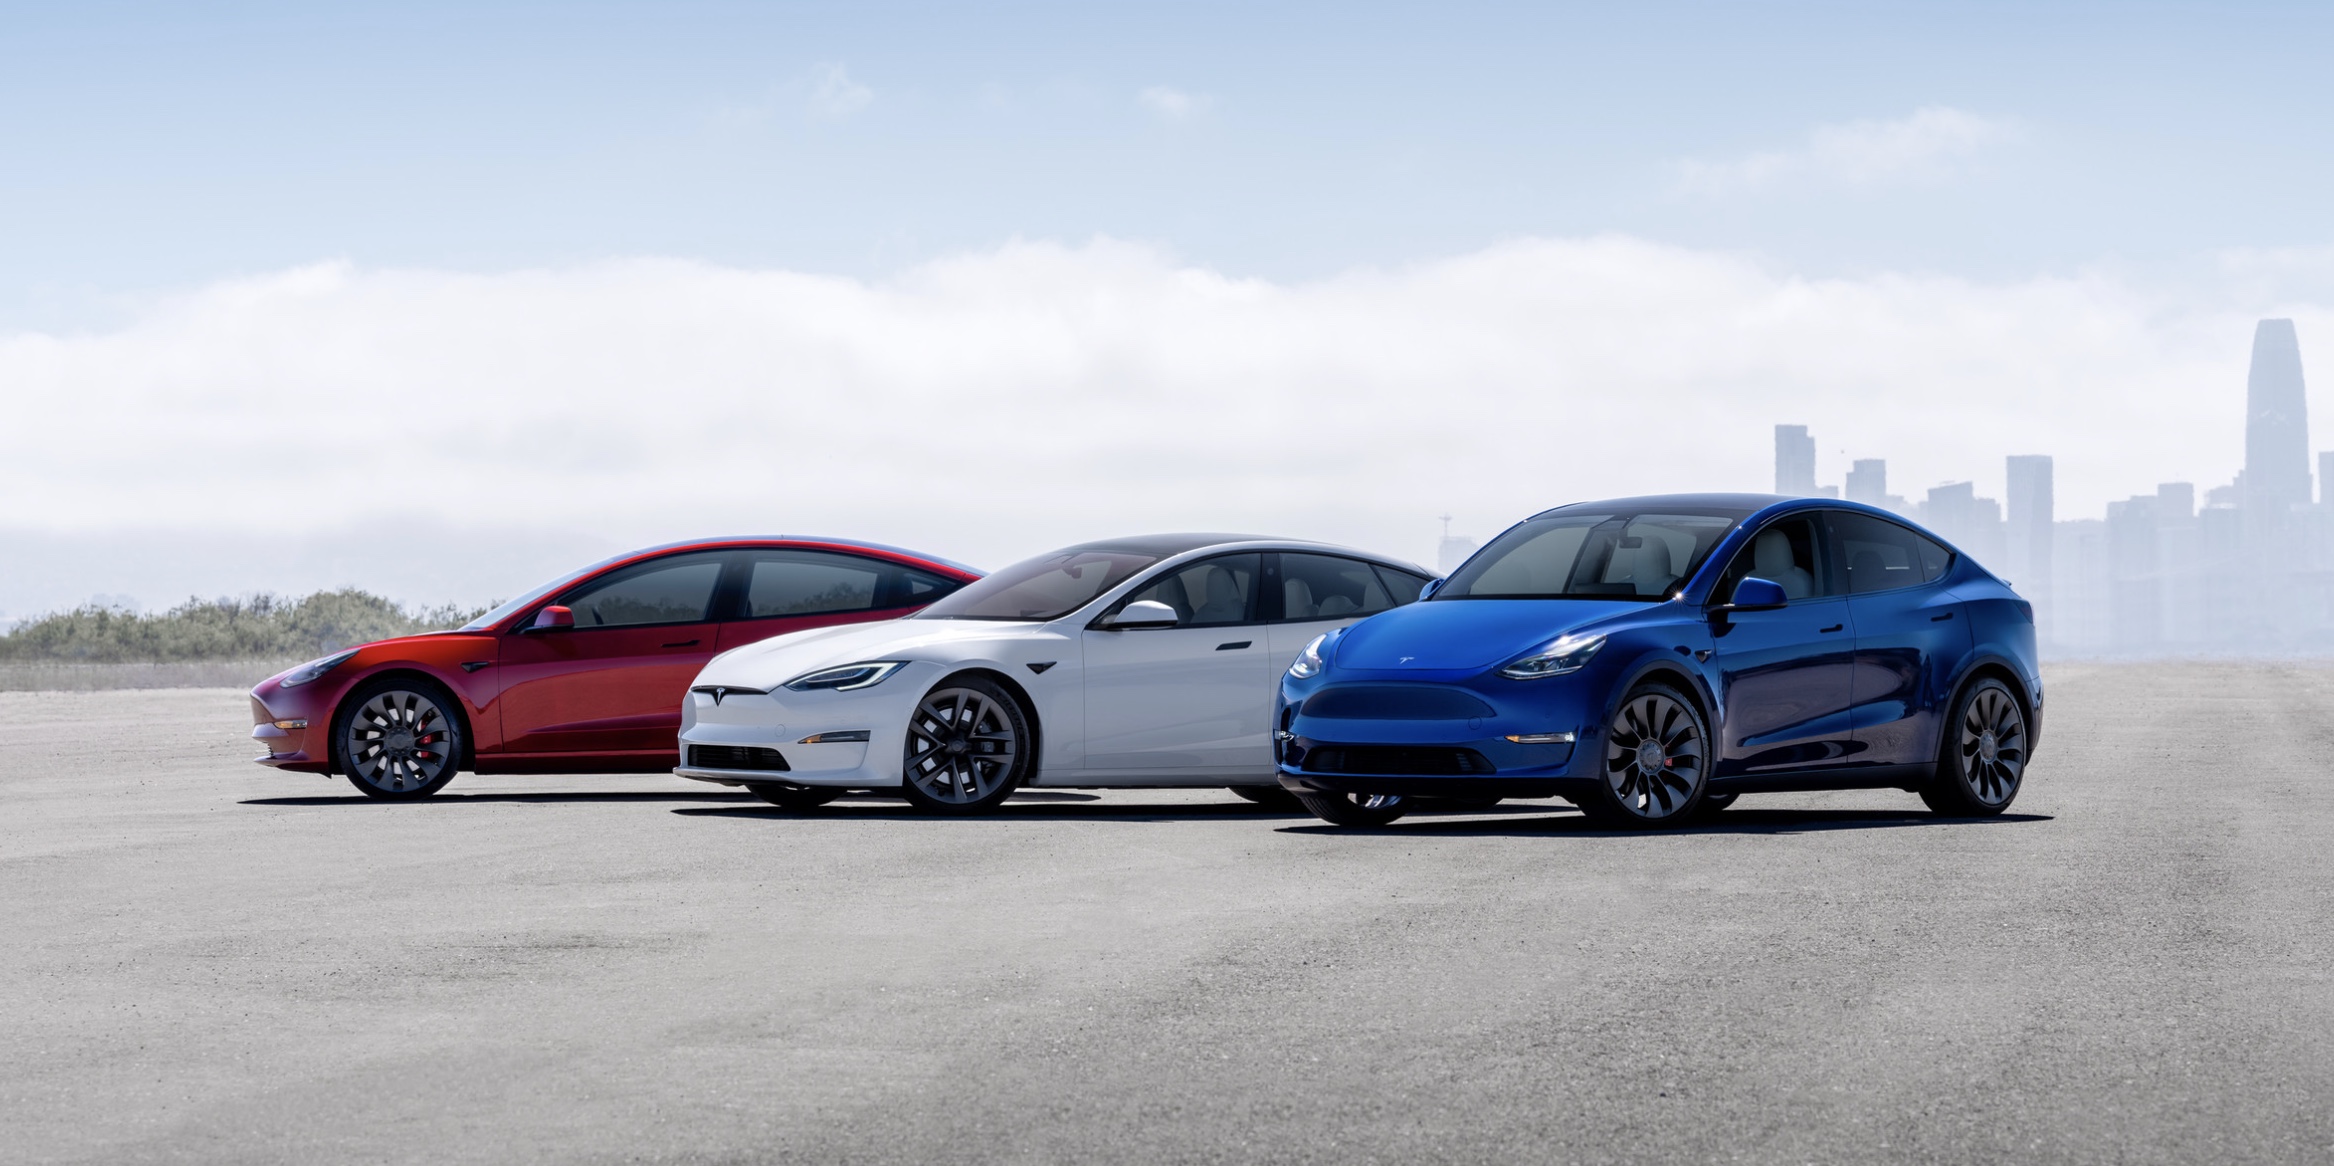 Tesla's Model 3 Is Here, and It's Much More Than an Electric Car